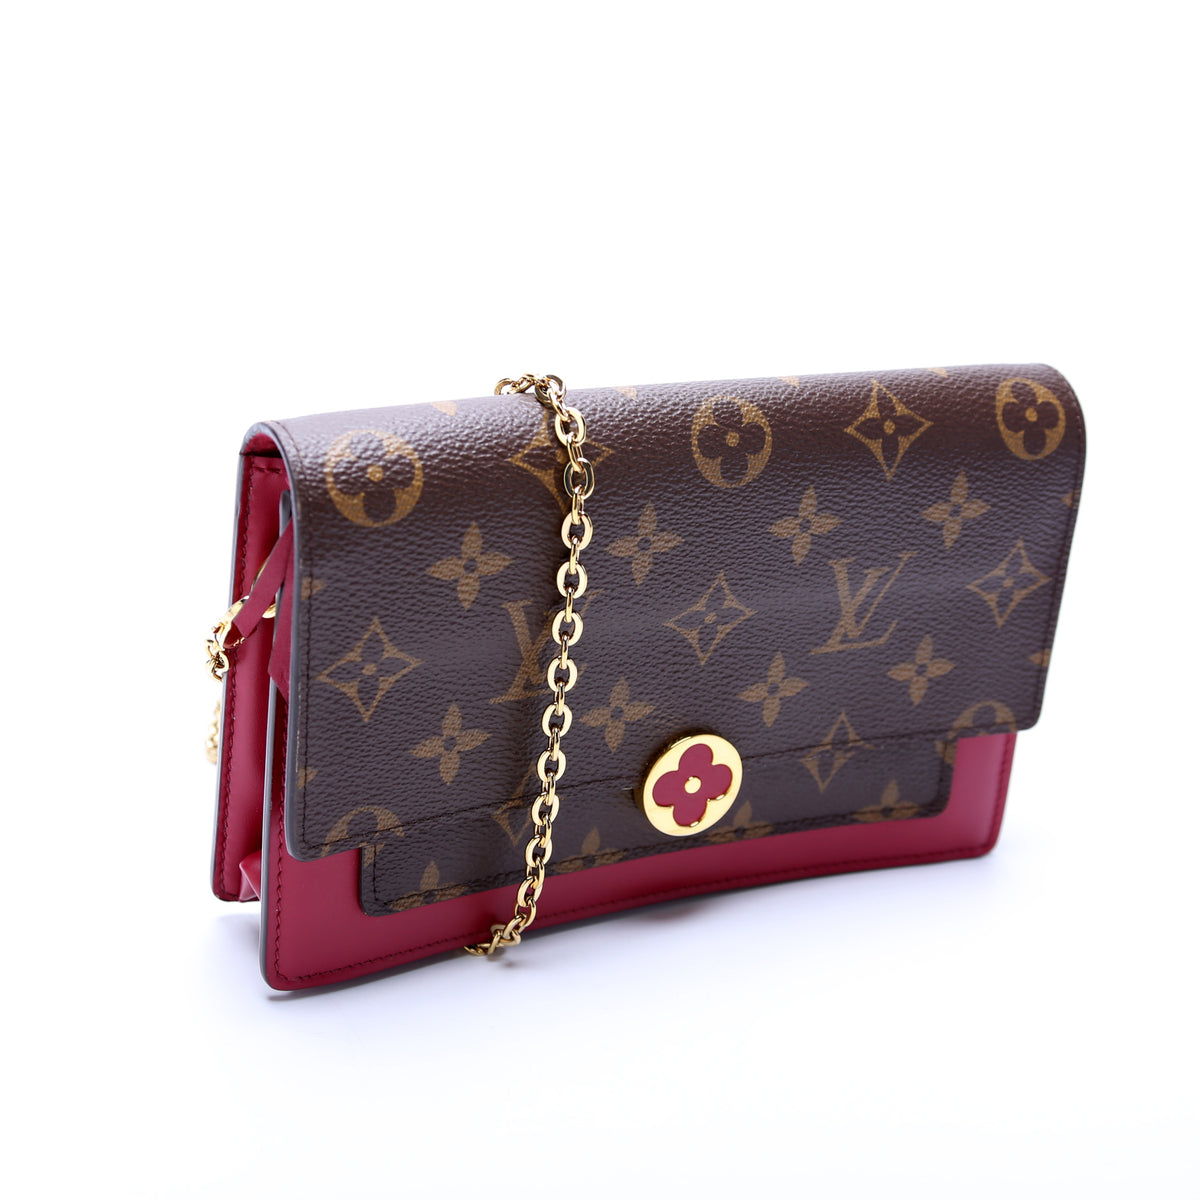 Sell Louis Vuitton Flore Chain Wallet - Brown/Red